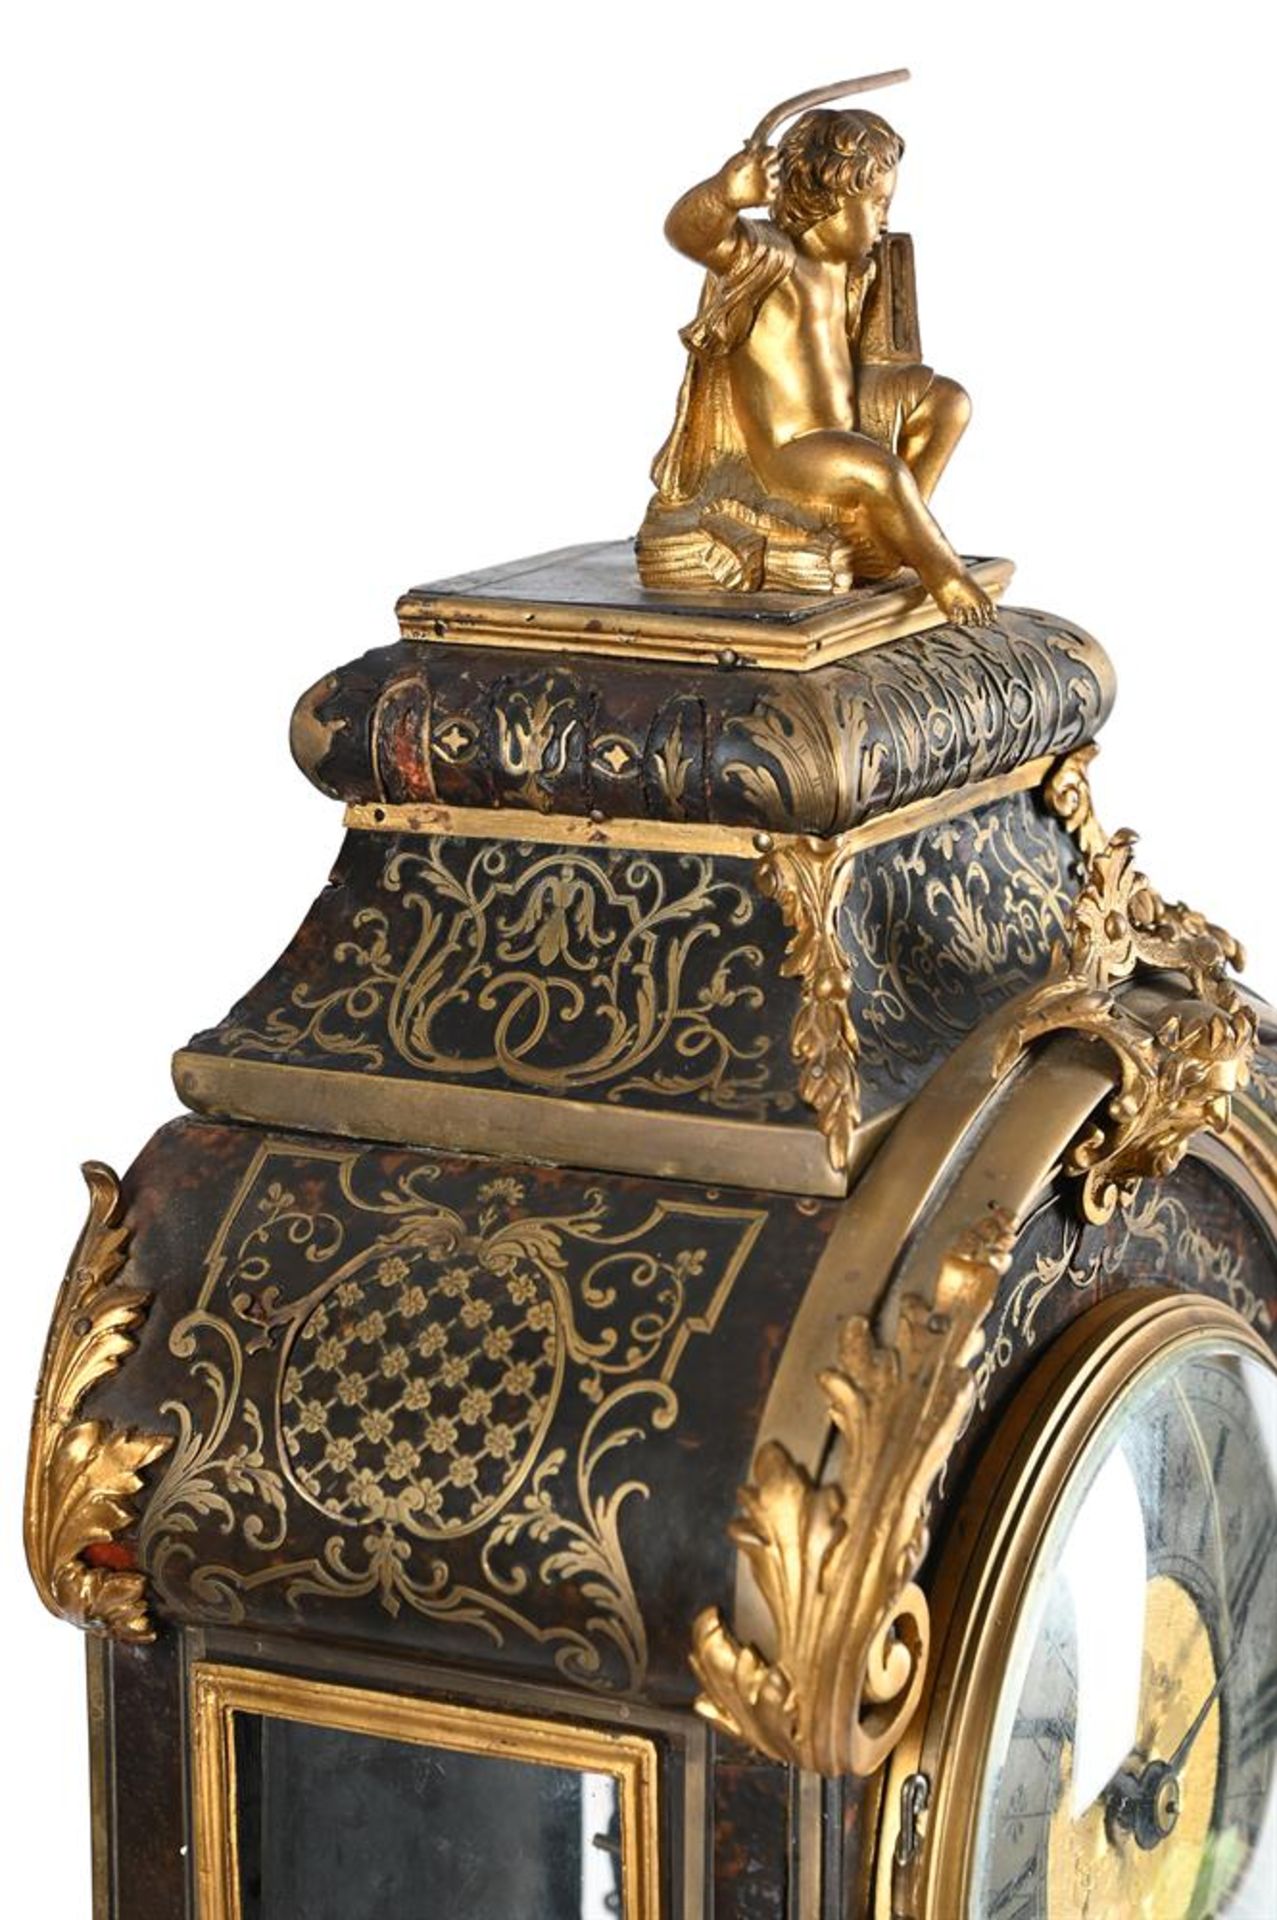 A FRENCH REGENCE BOULLE SMALL BRACKET CLOCK WITH LATER MOVEMENT, EARLY 18TH CENTURY AND LATER - Image 4 of 5